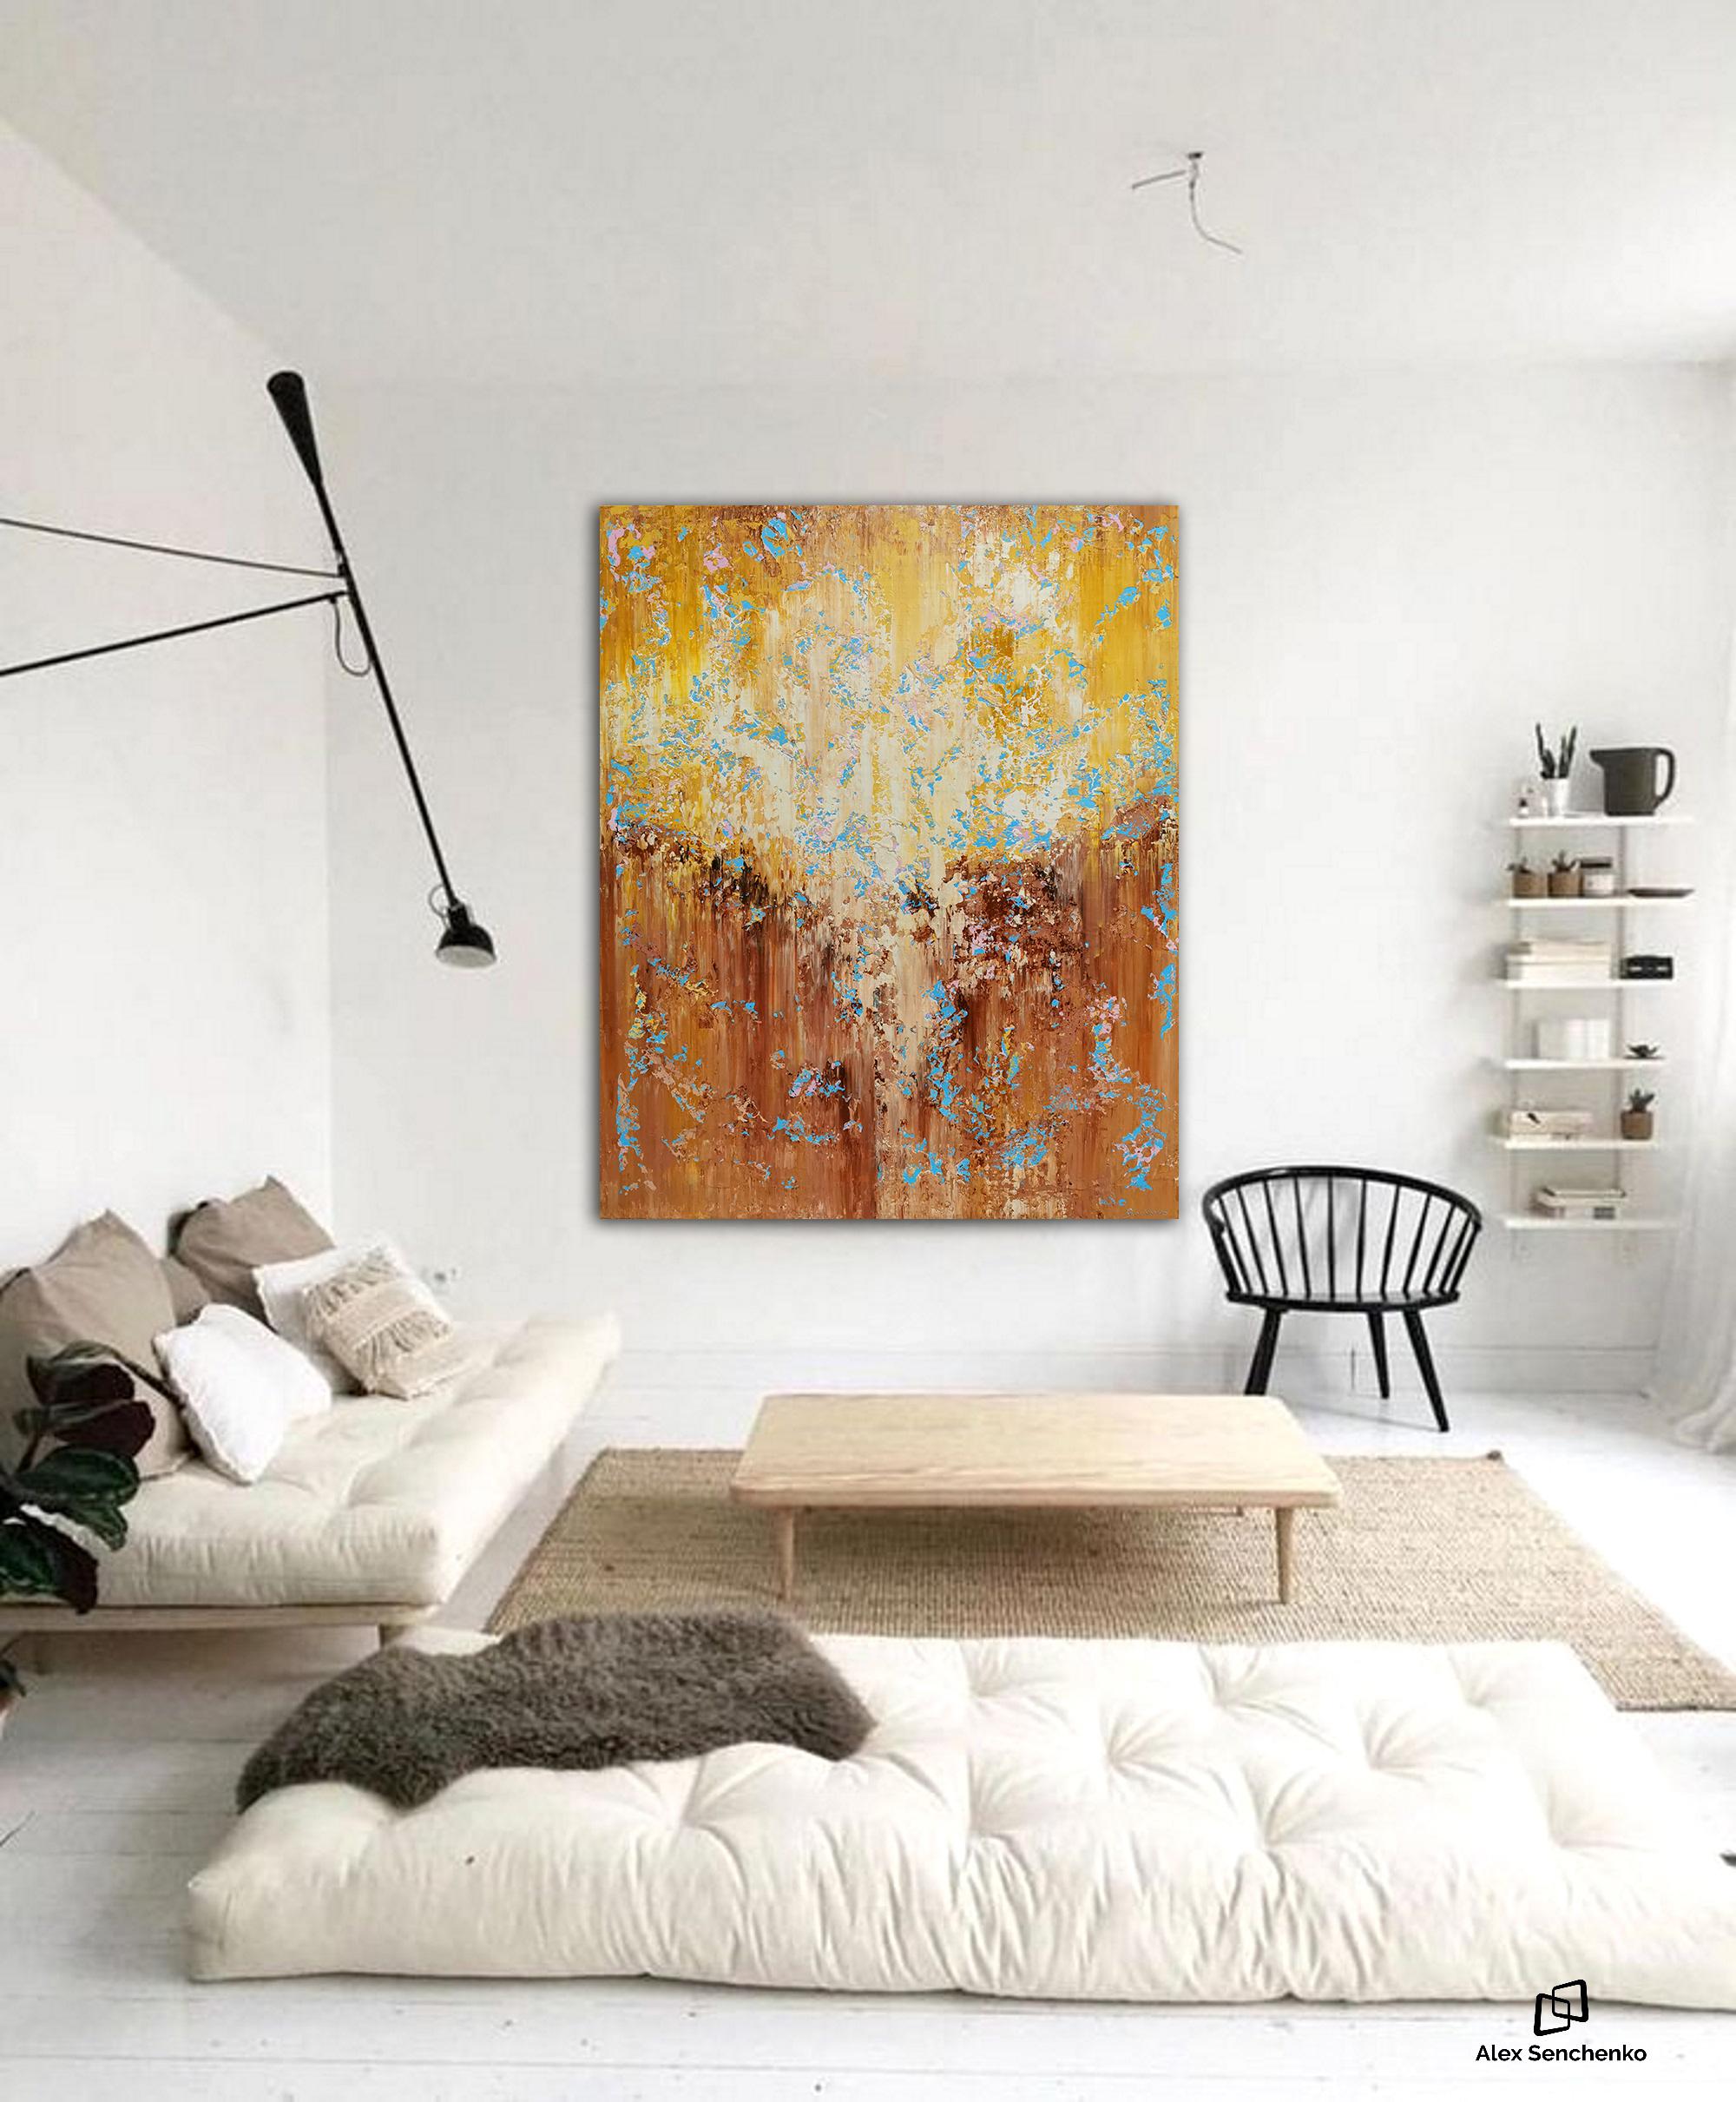 Color can have a huge impact on our lives. Flower fields, sunsets, the city skyline;
all of the most beautiful things in the world have bright, vibrant color in common.

Give your home a piece of something beautiful with Abstract 1269, an incredible